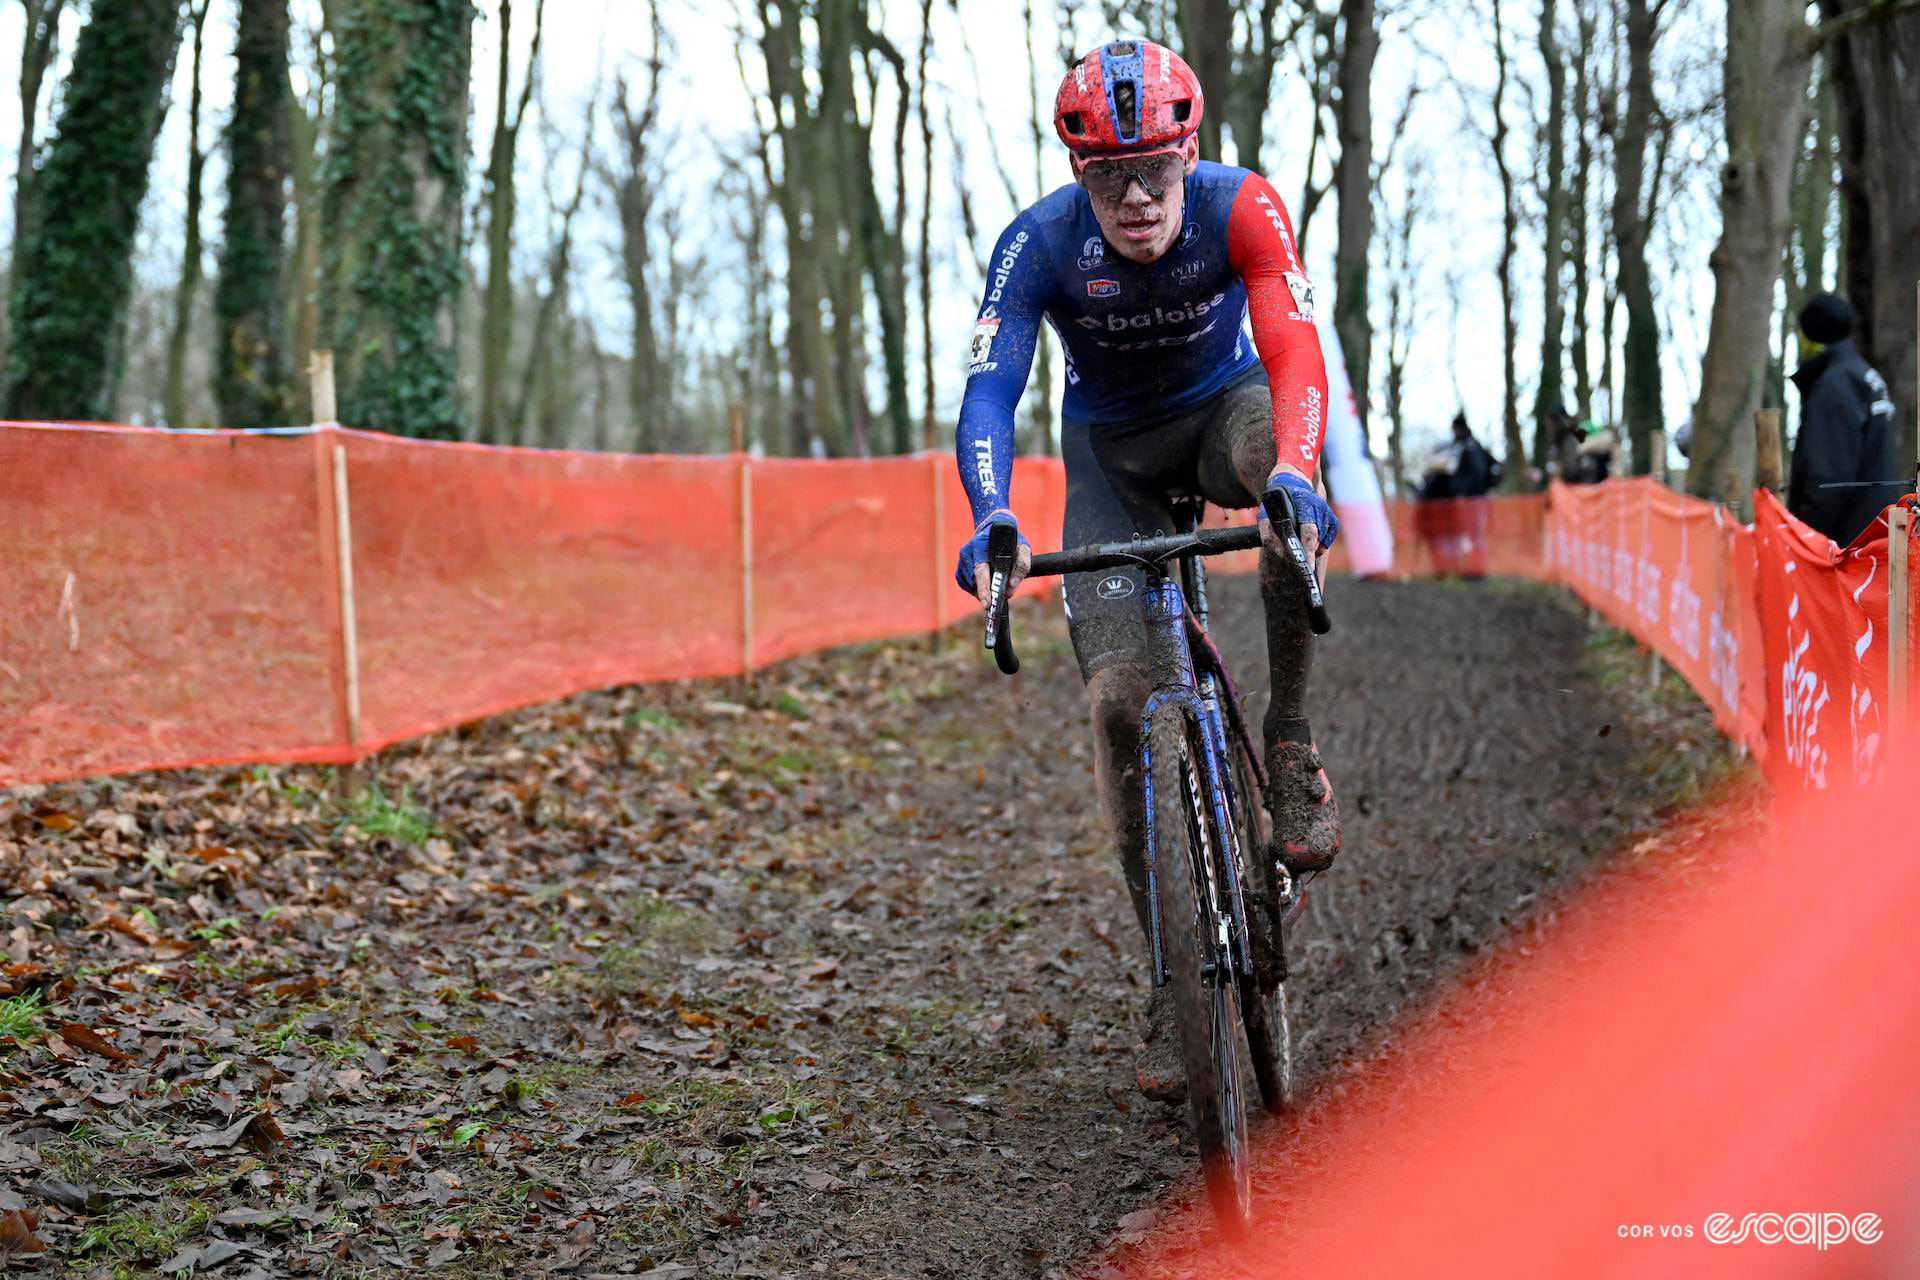 Pim Ronhaar riding solo during Cyclocross World Cup Flamanville.